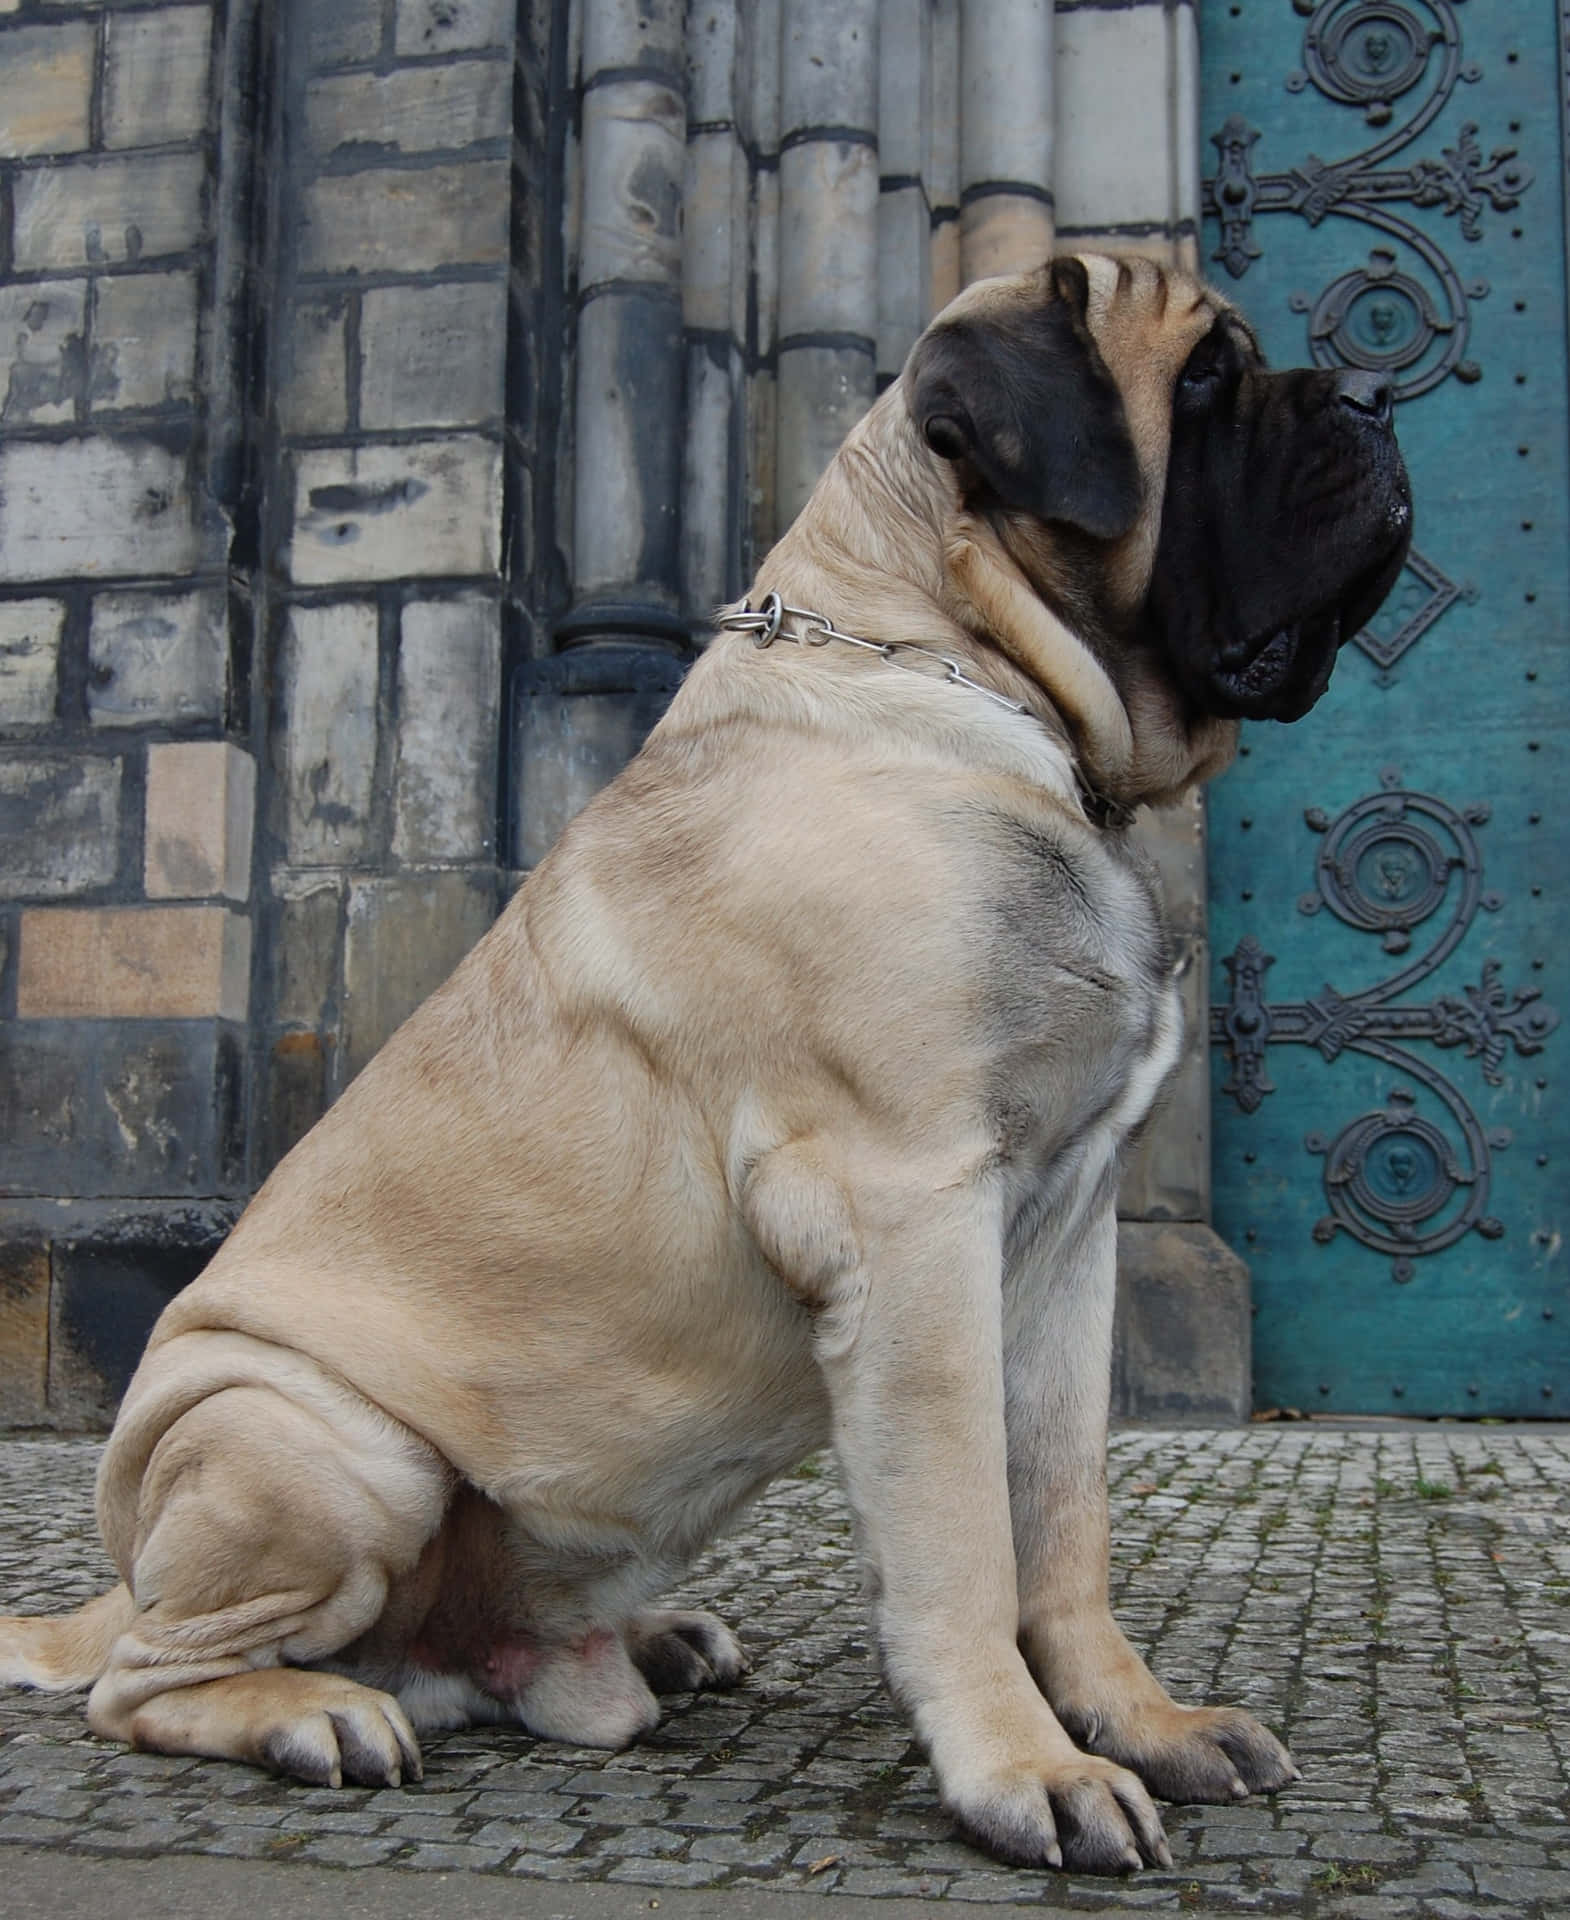 A Large Dog Sitting On The Ground